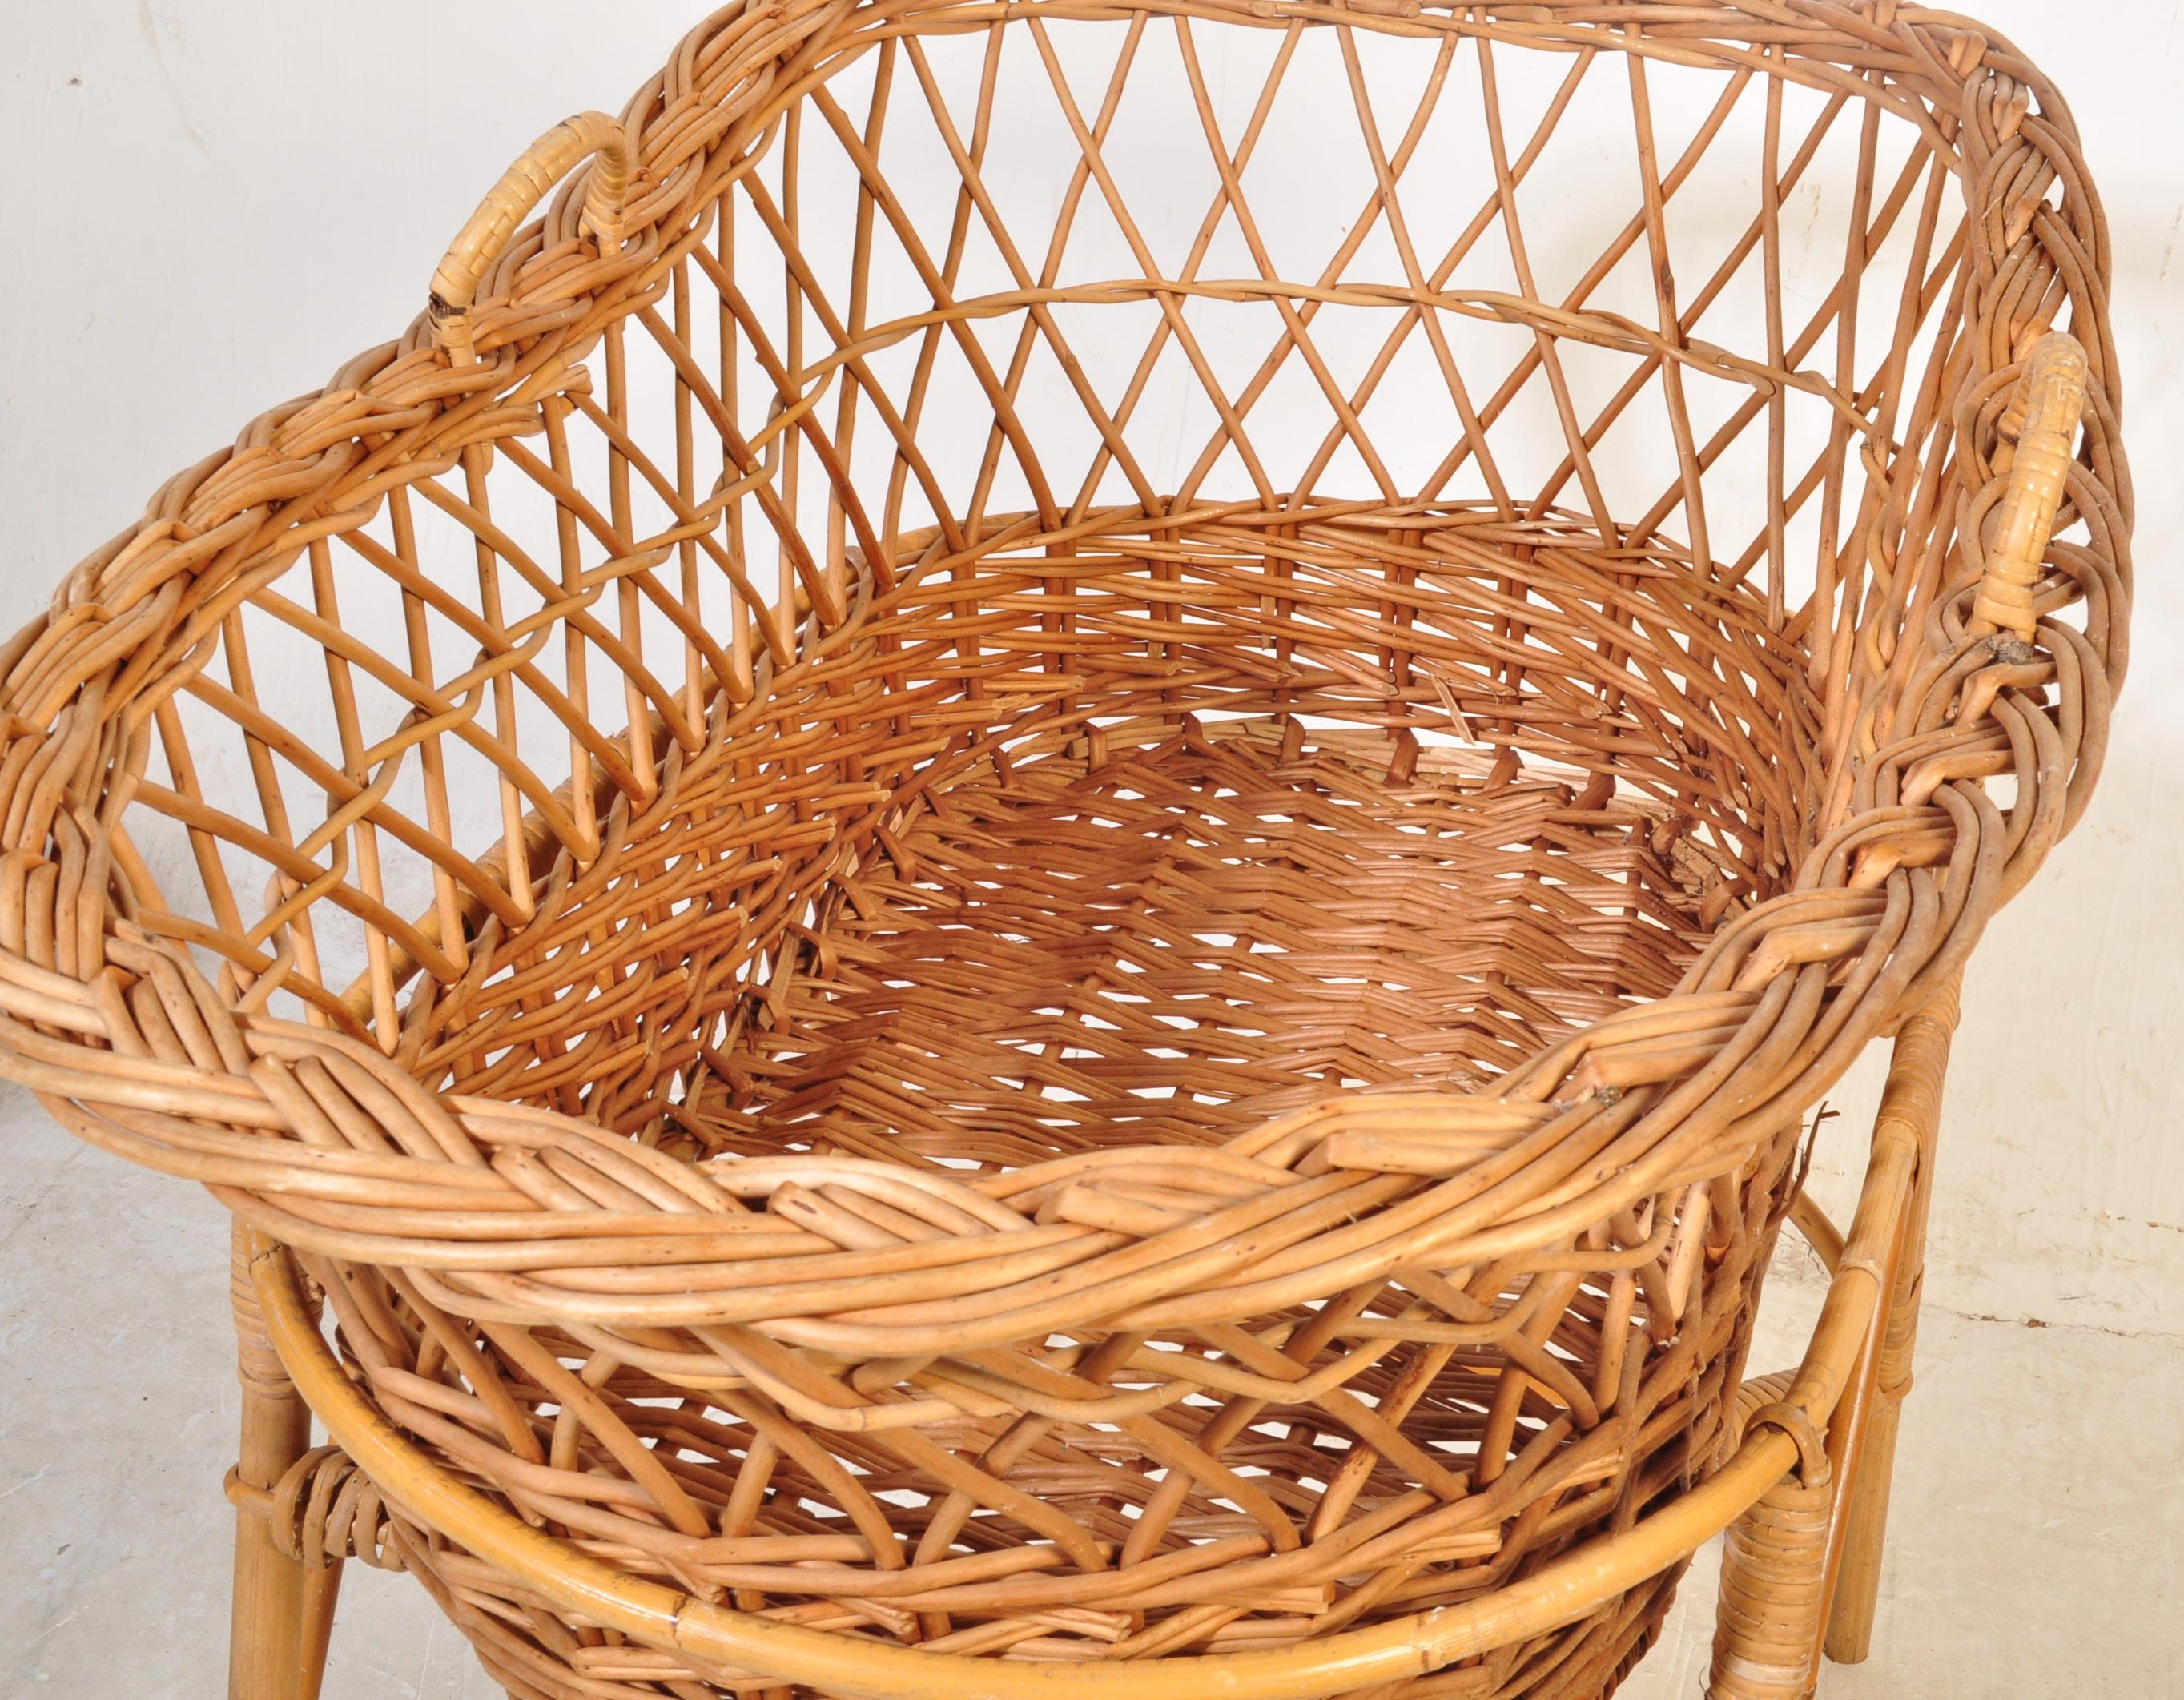 A RETRO VINTAGE CANED WICKER BAMBOO MOSES BASKET - Image 4 of 6